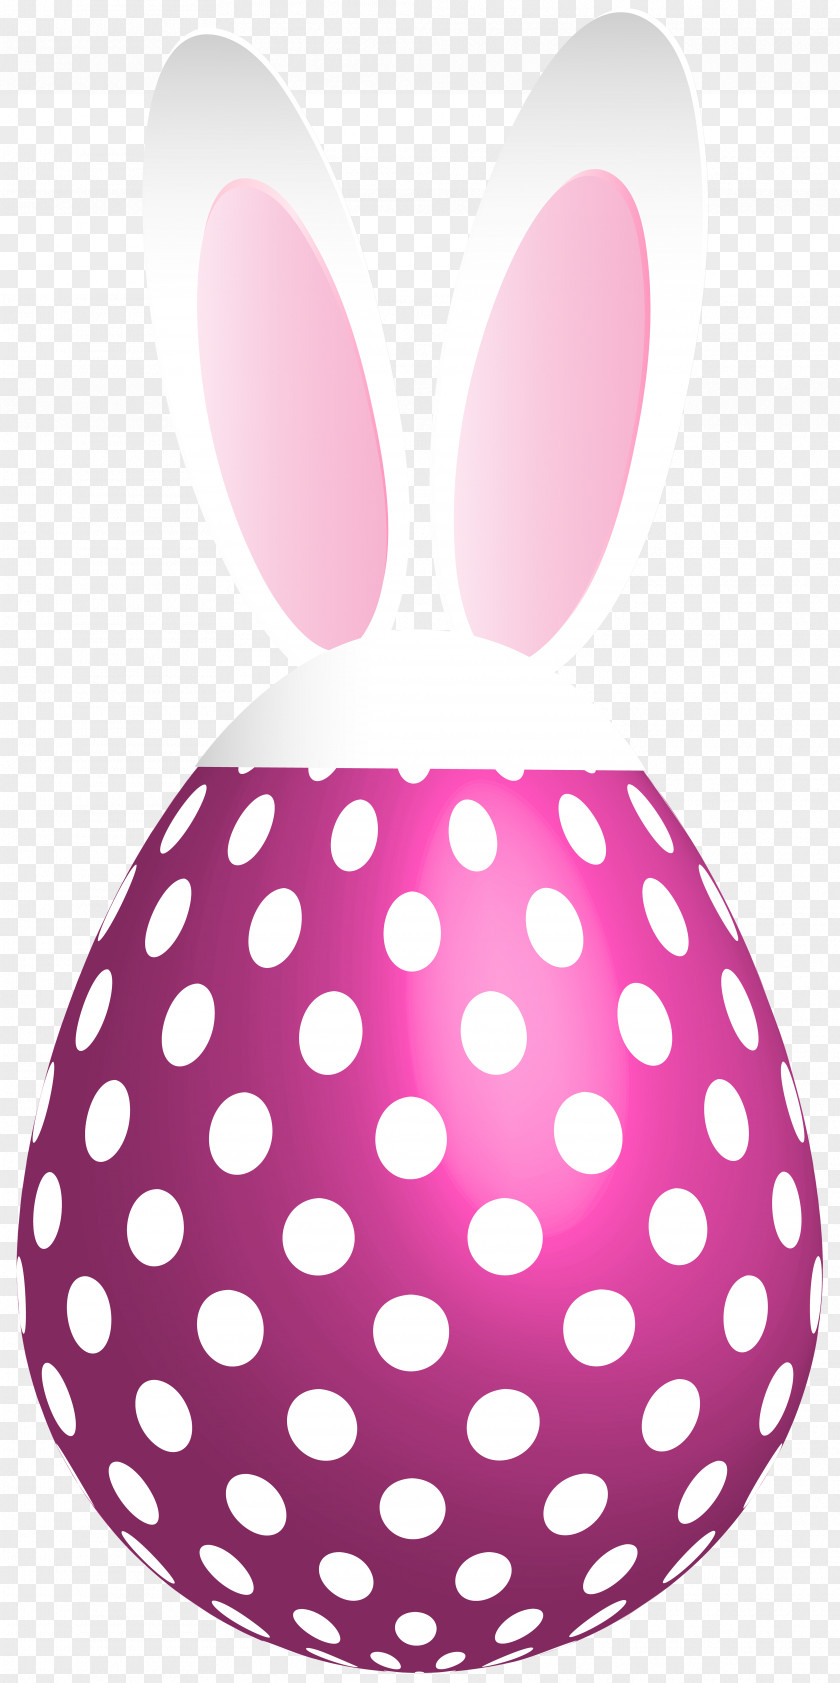 Easter Dotted Bunny Egg Pink Transparent Clip Art Christmas Ornament Decoration Tree PNG